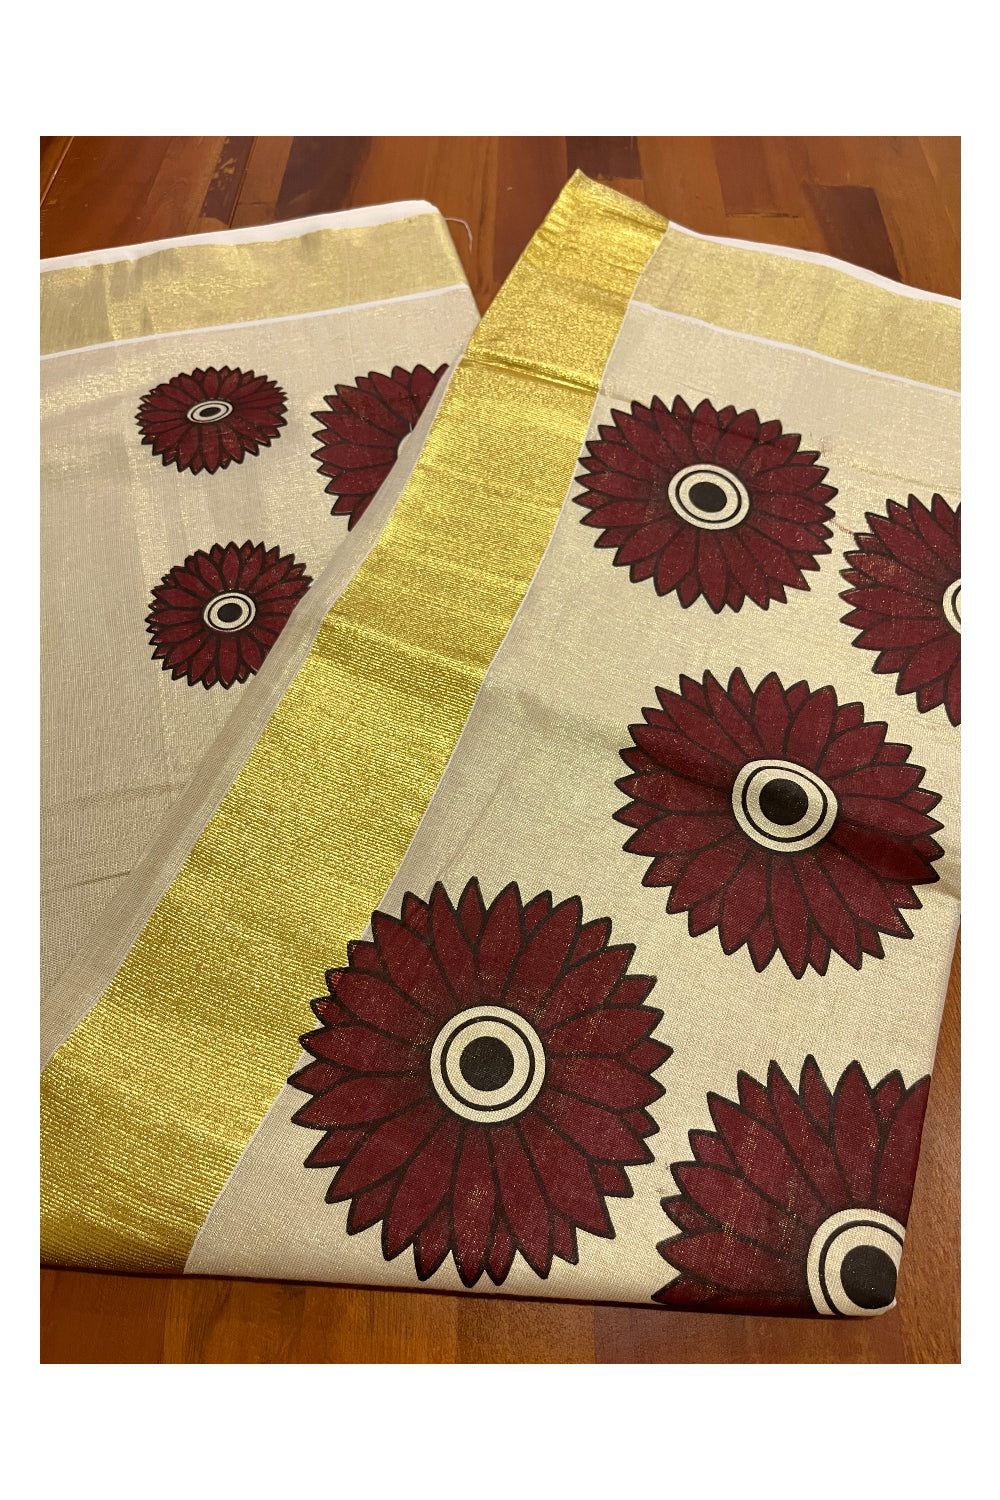 Southloom Exclusive Tissue Kasavu Saree With Maroon Sunflower Art On Body and Pallu